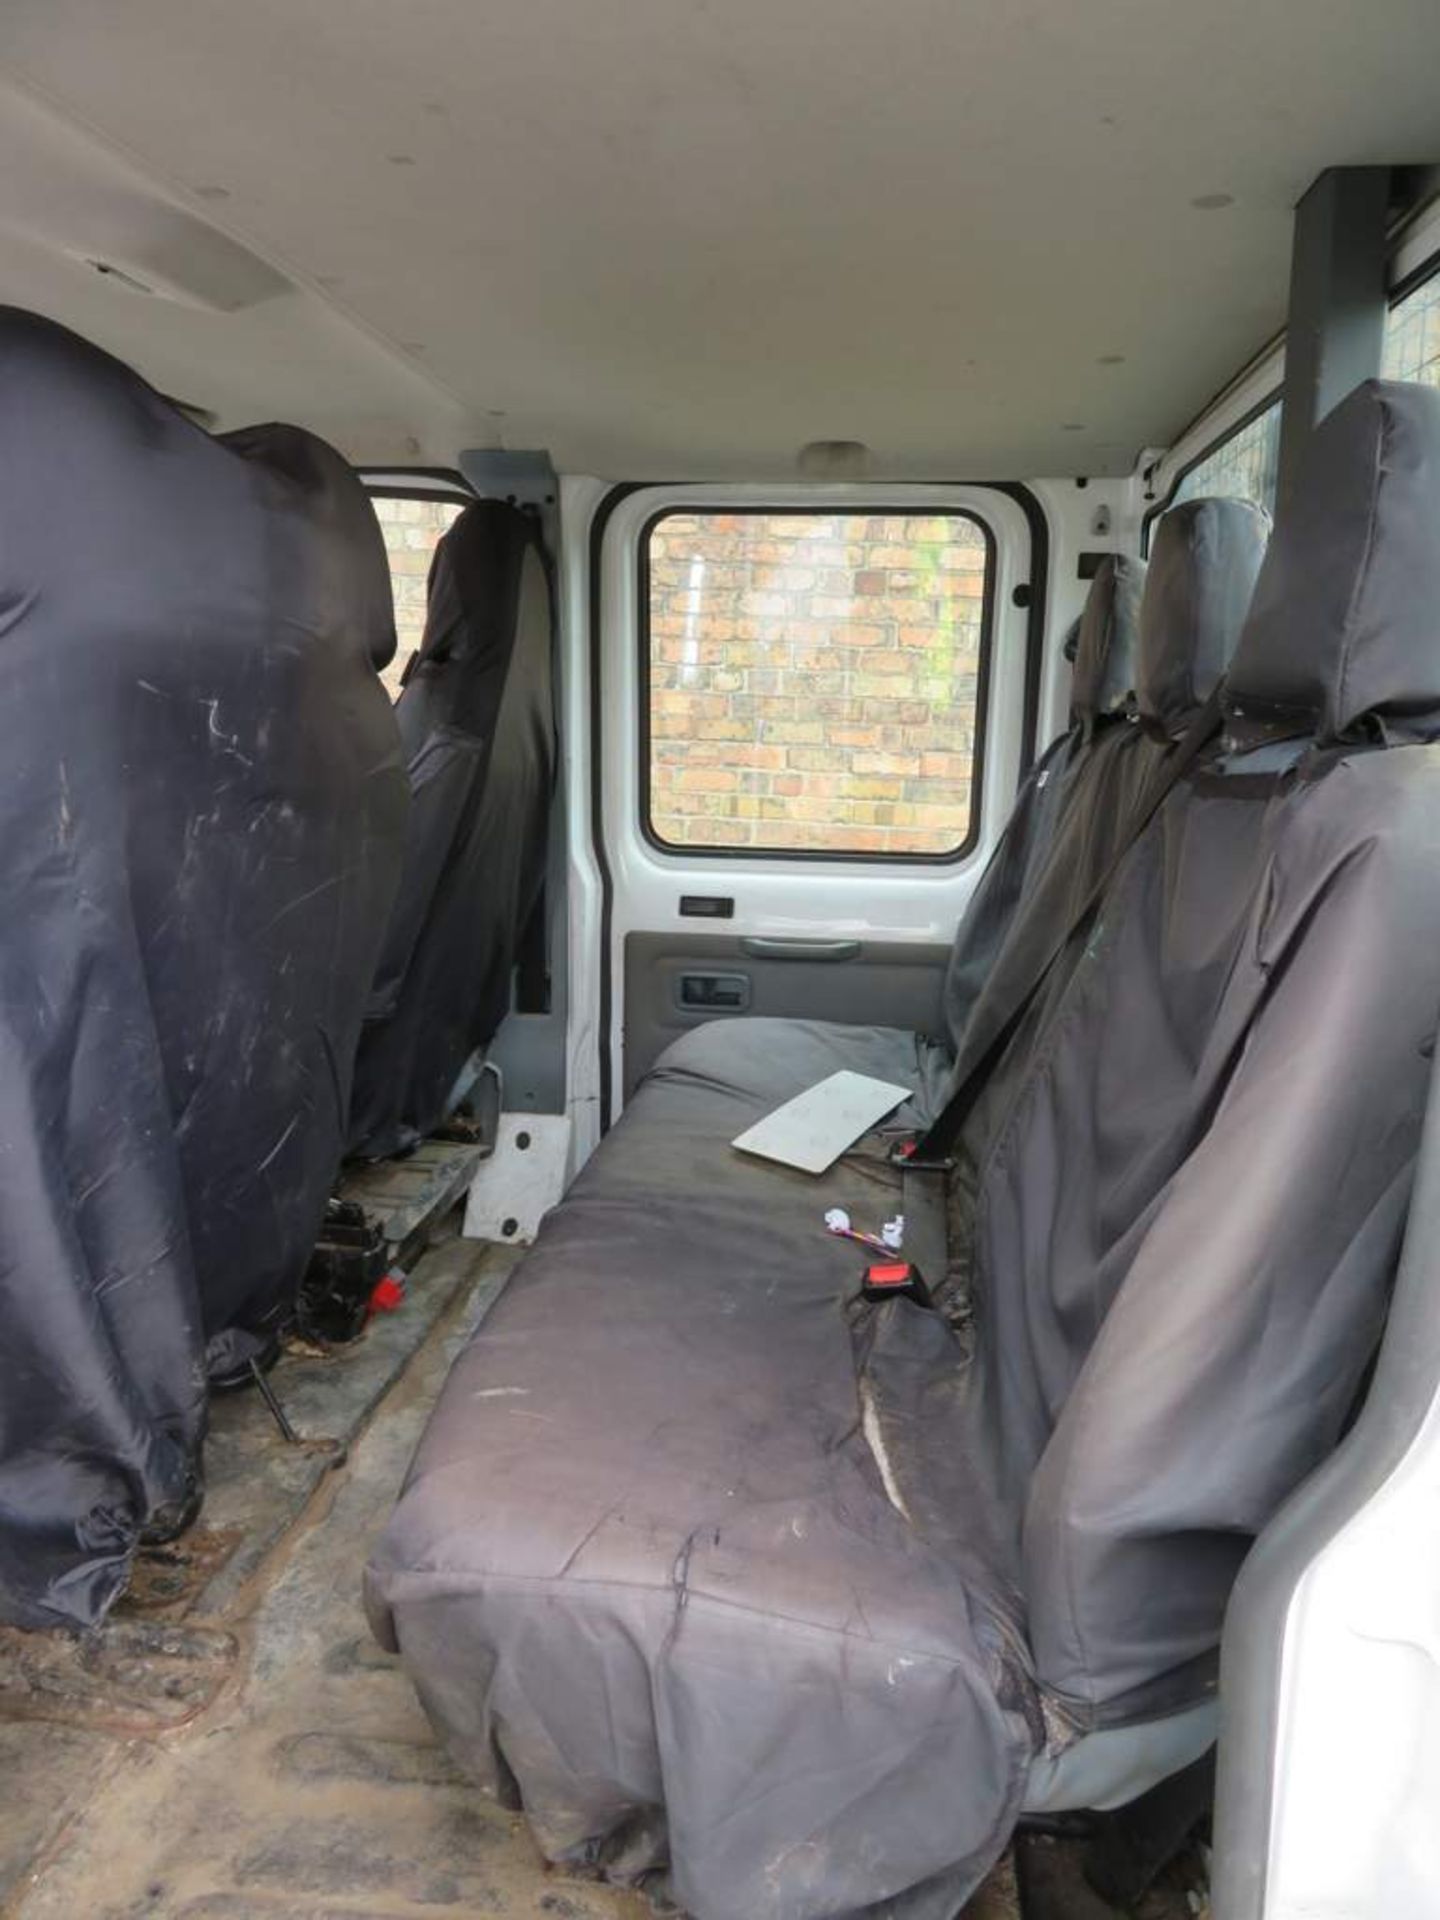 2009 Ford Transit T350L Double Cab Tipper - FX09 YDJ - Image 10 of 23